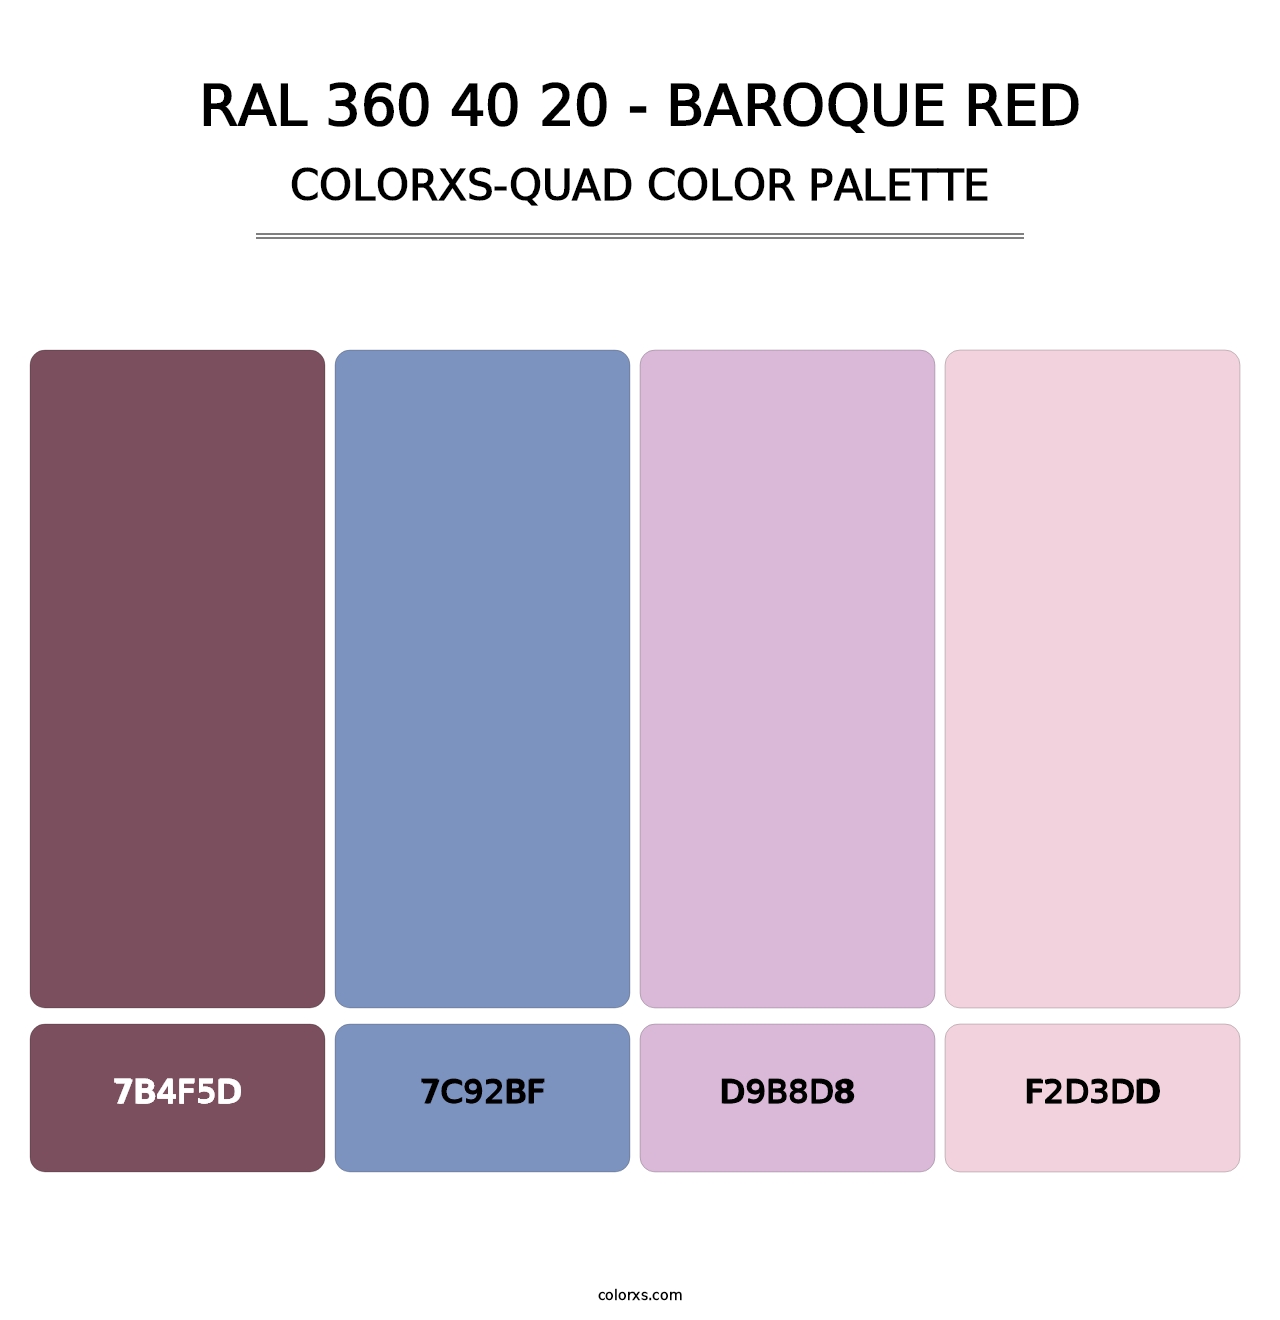 RAL 360 40 20 - Baroque Red - Colorxs Quad Palette